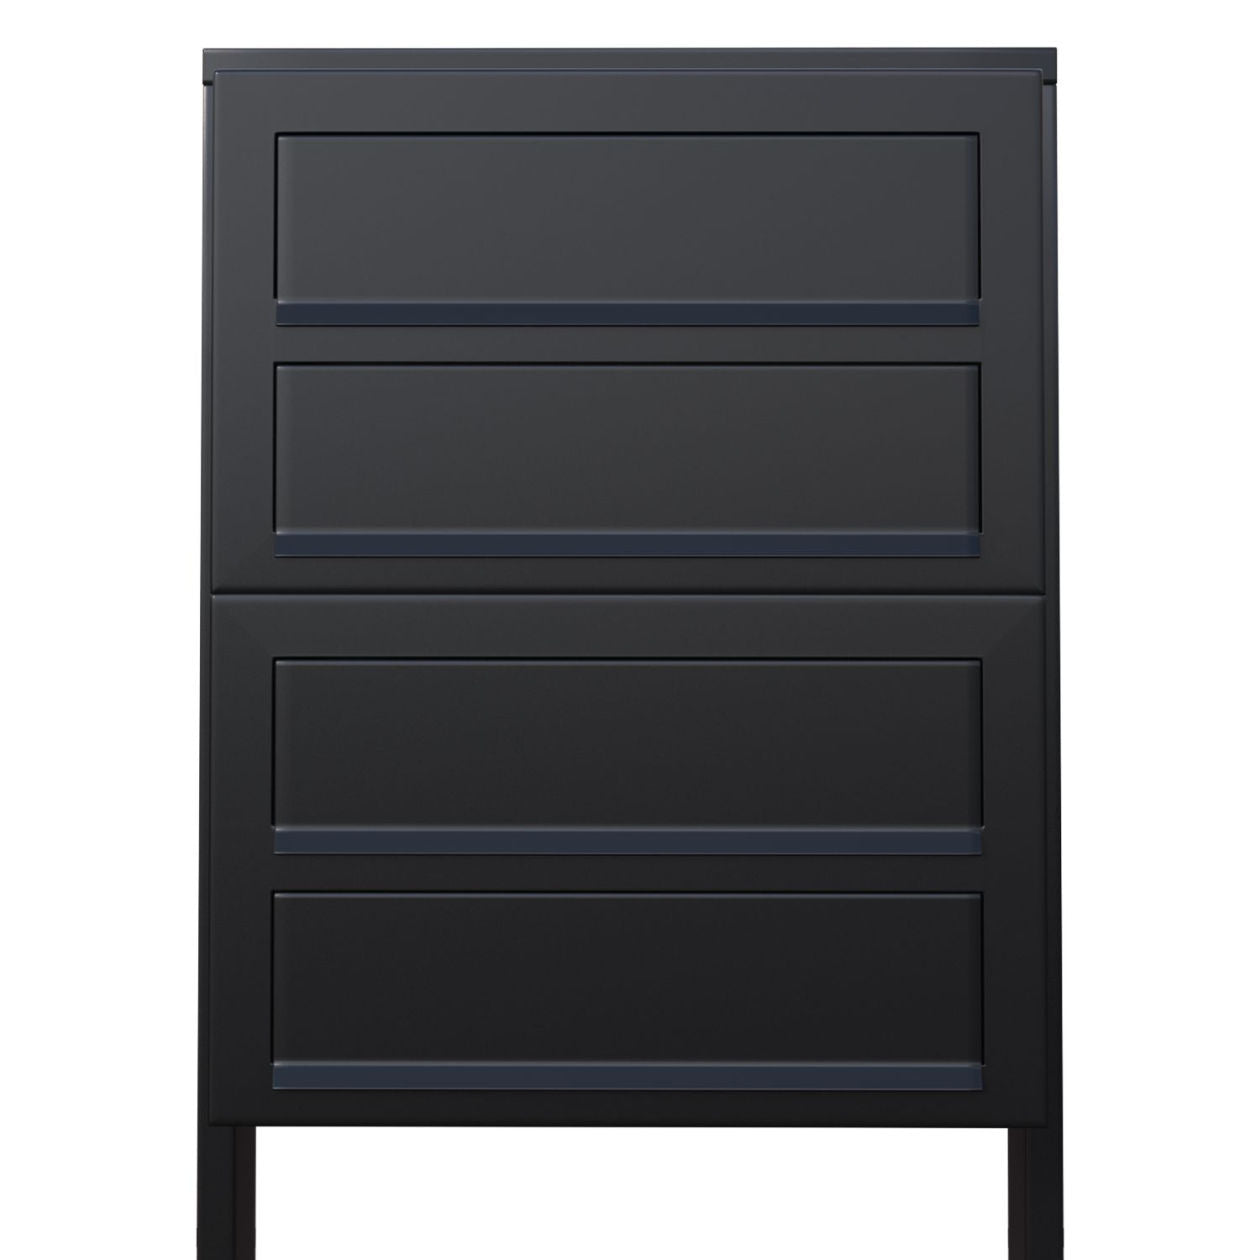 STAND CUBE 4 by Bravios - Modern post-mounted 4-unit black mailbox